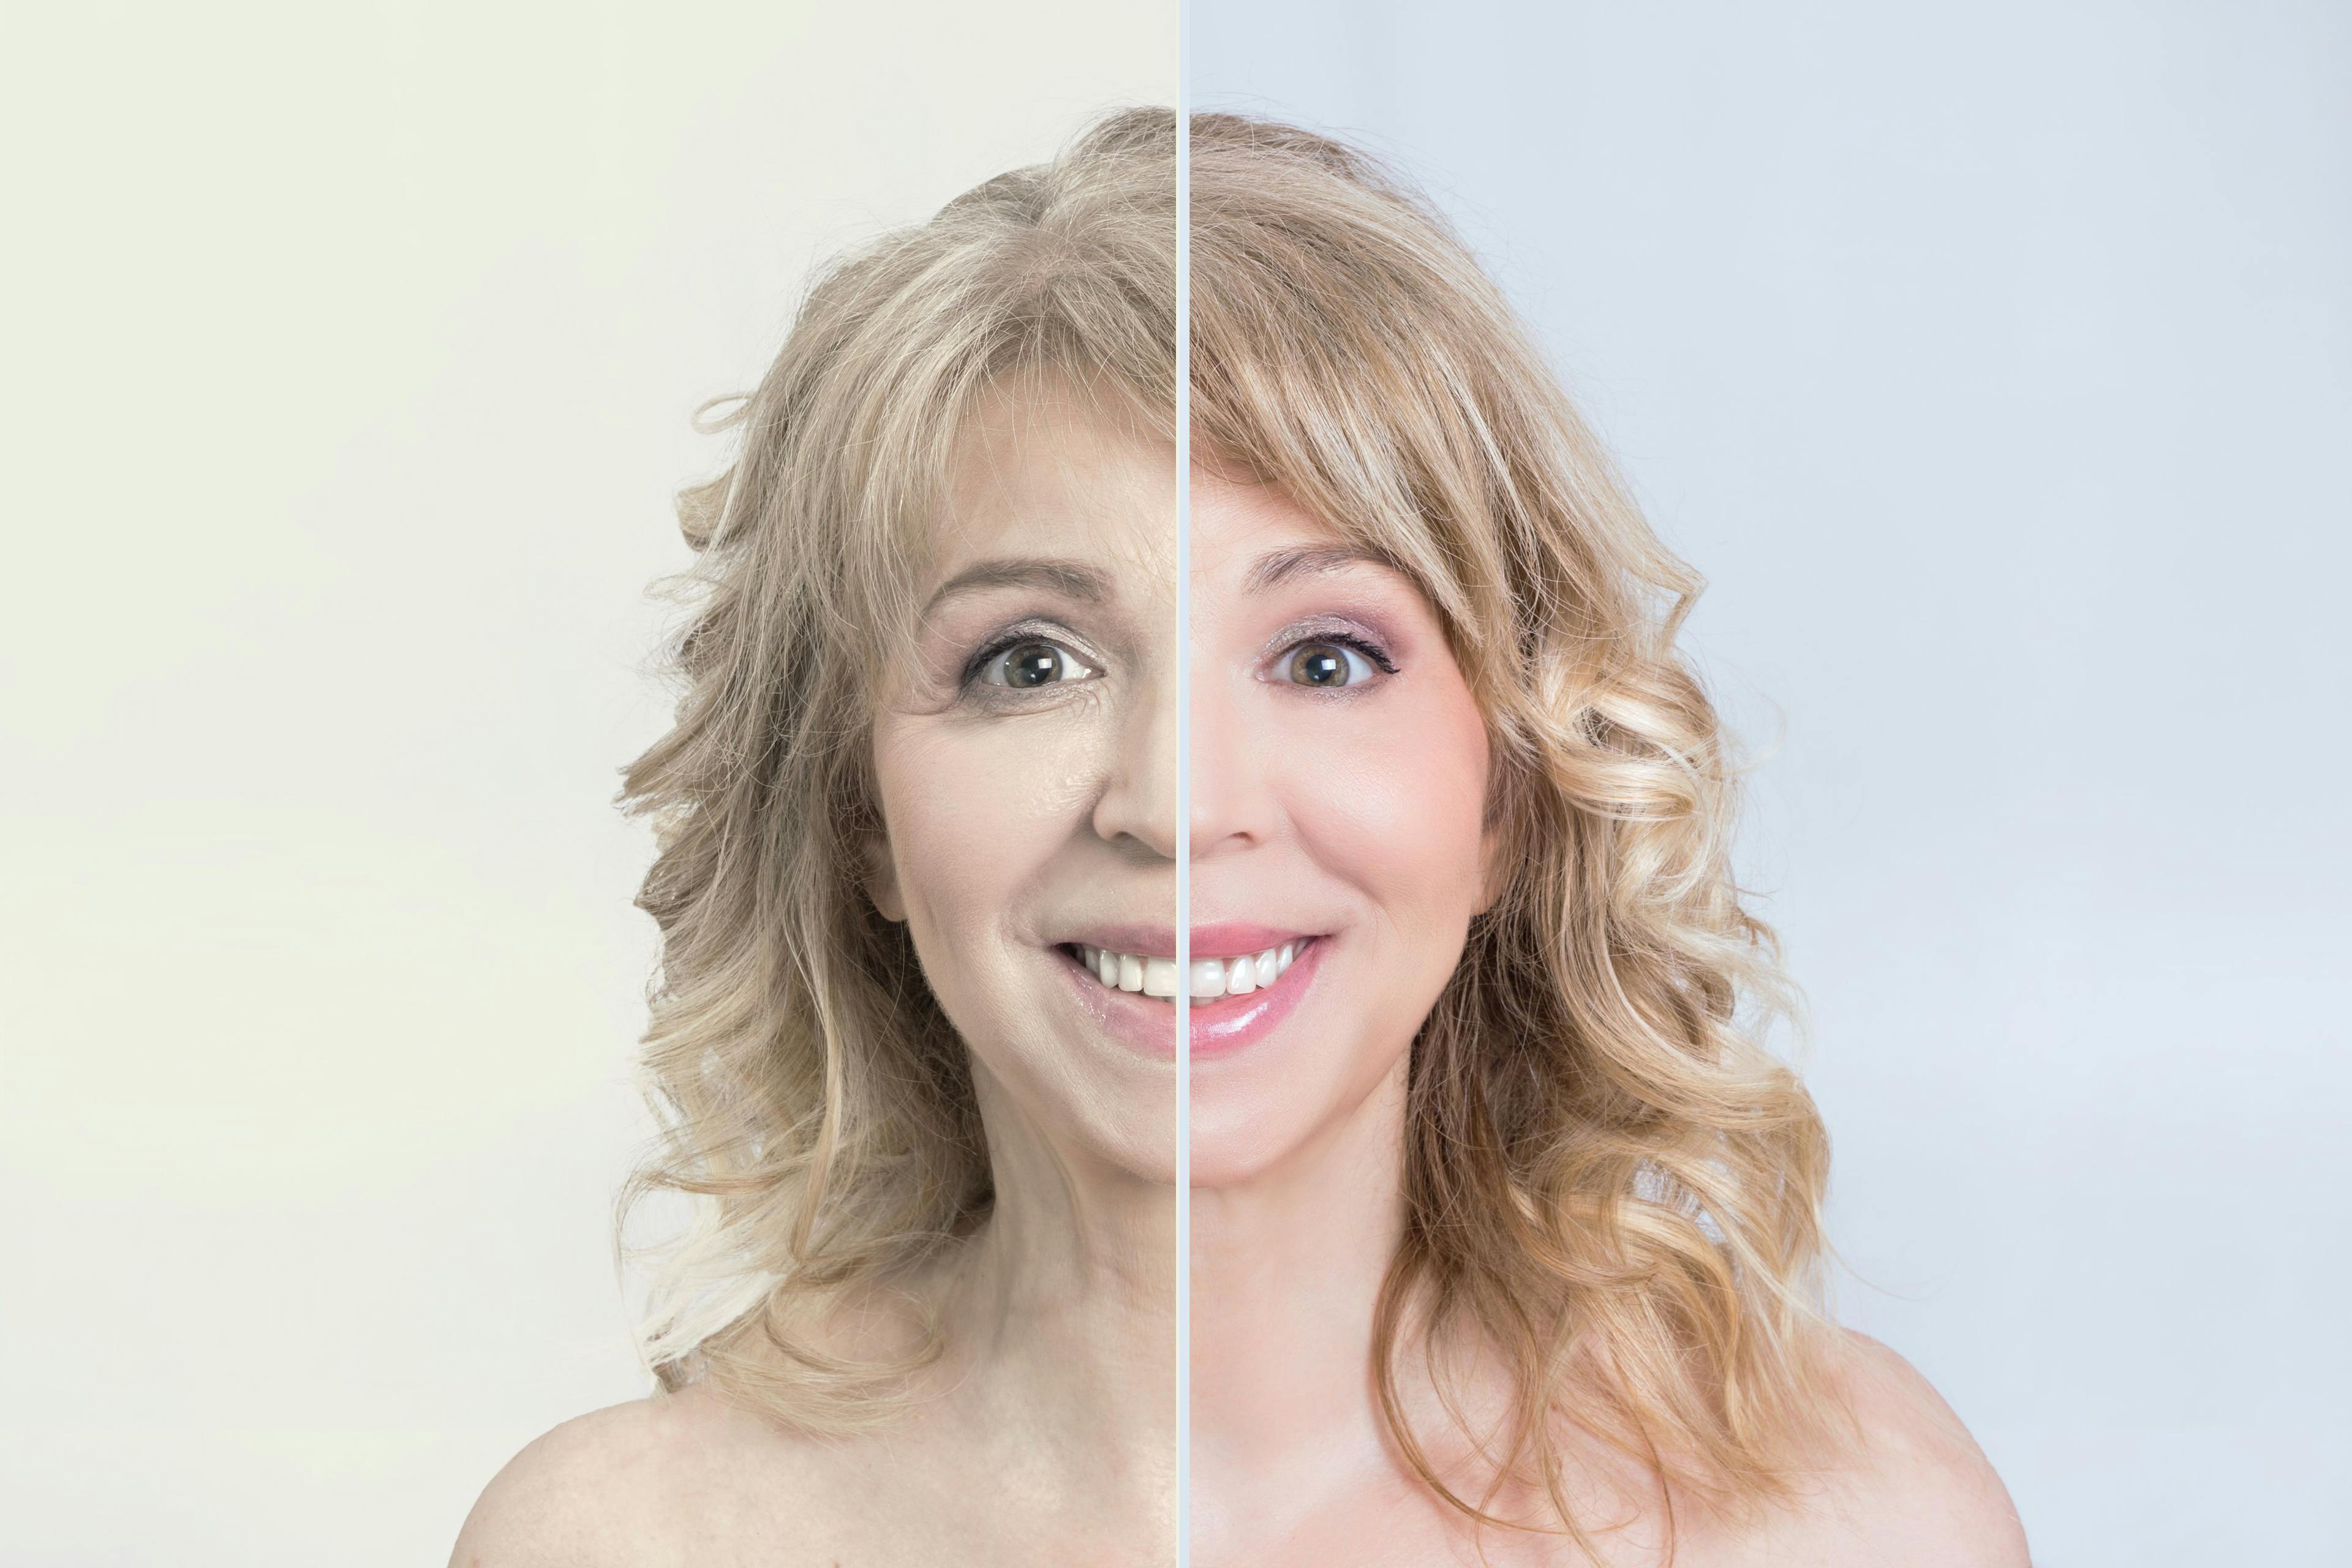 The two faces of botulinum toxin